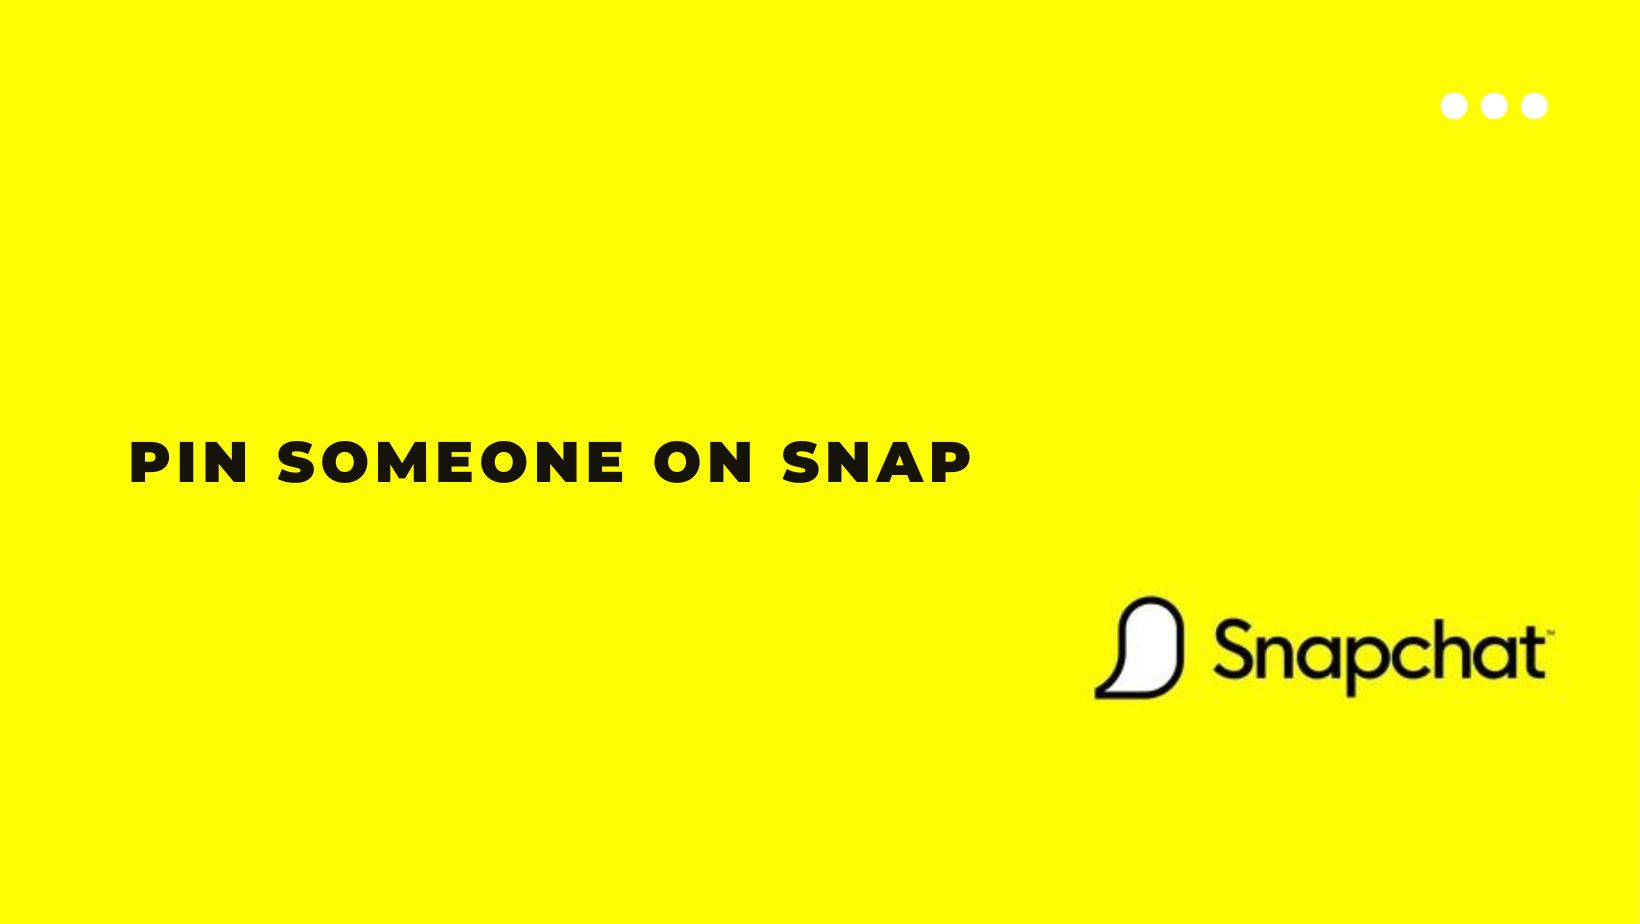 Pin someone on snap